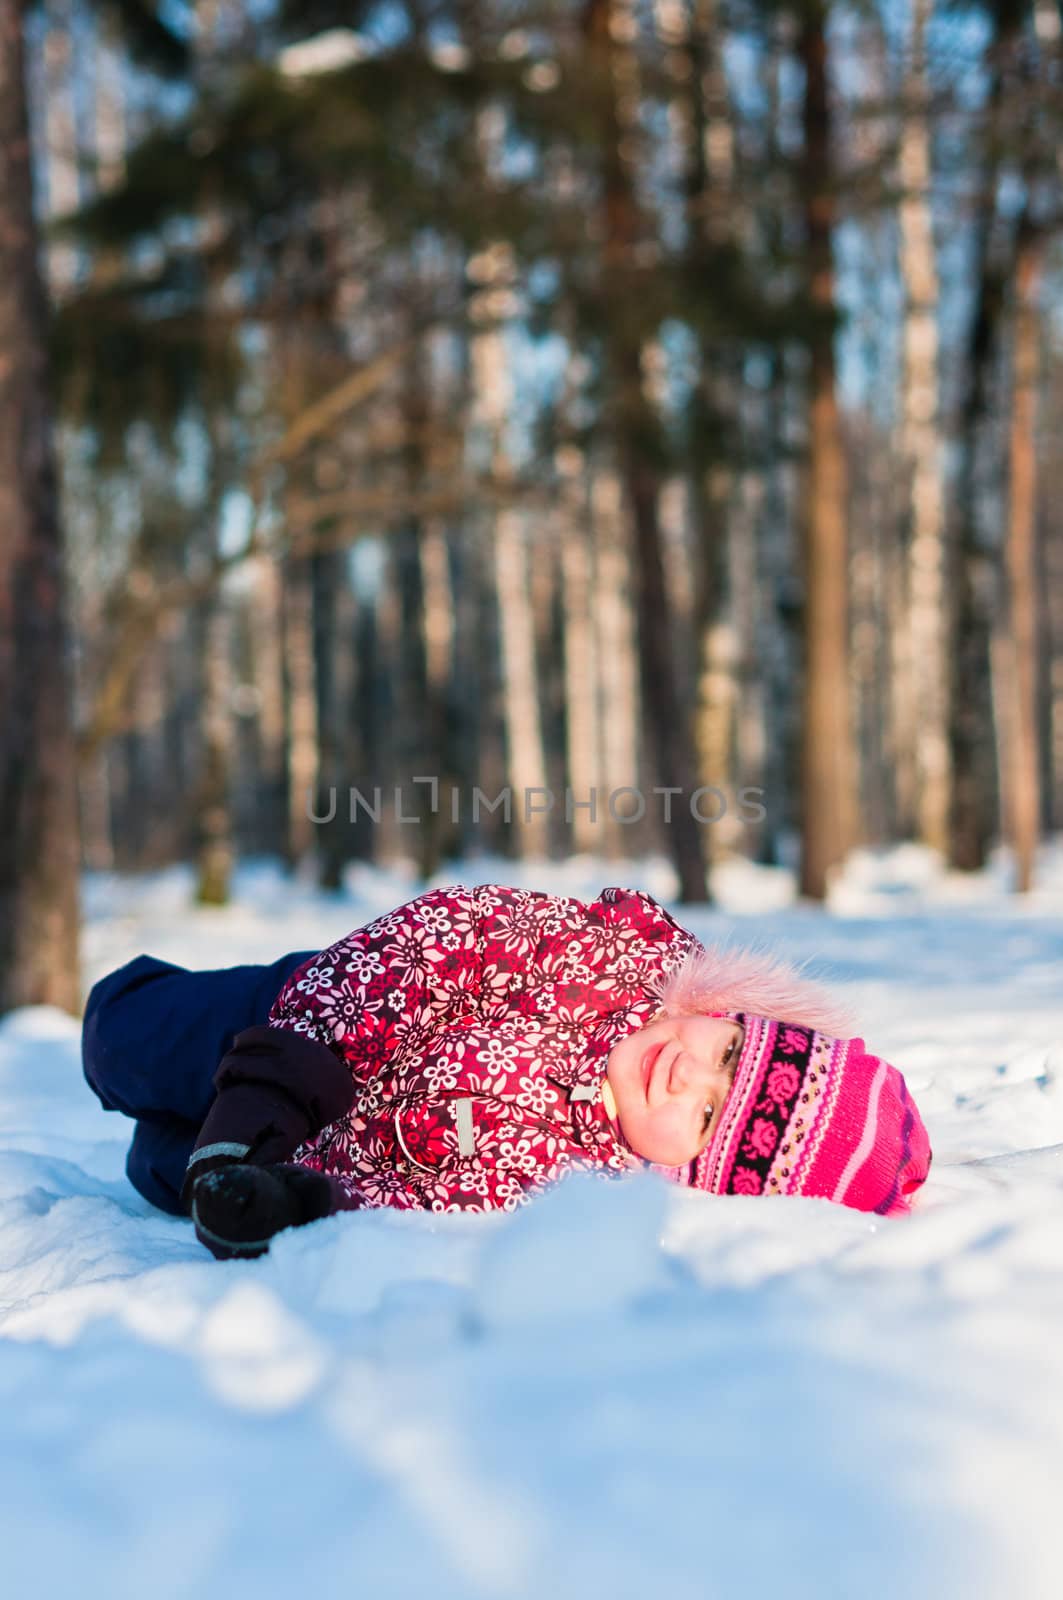 Baby lays on snow in wood, looks and smile